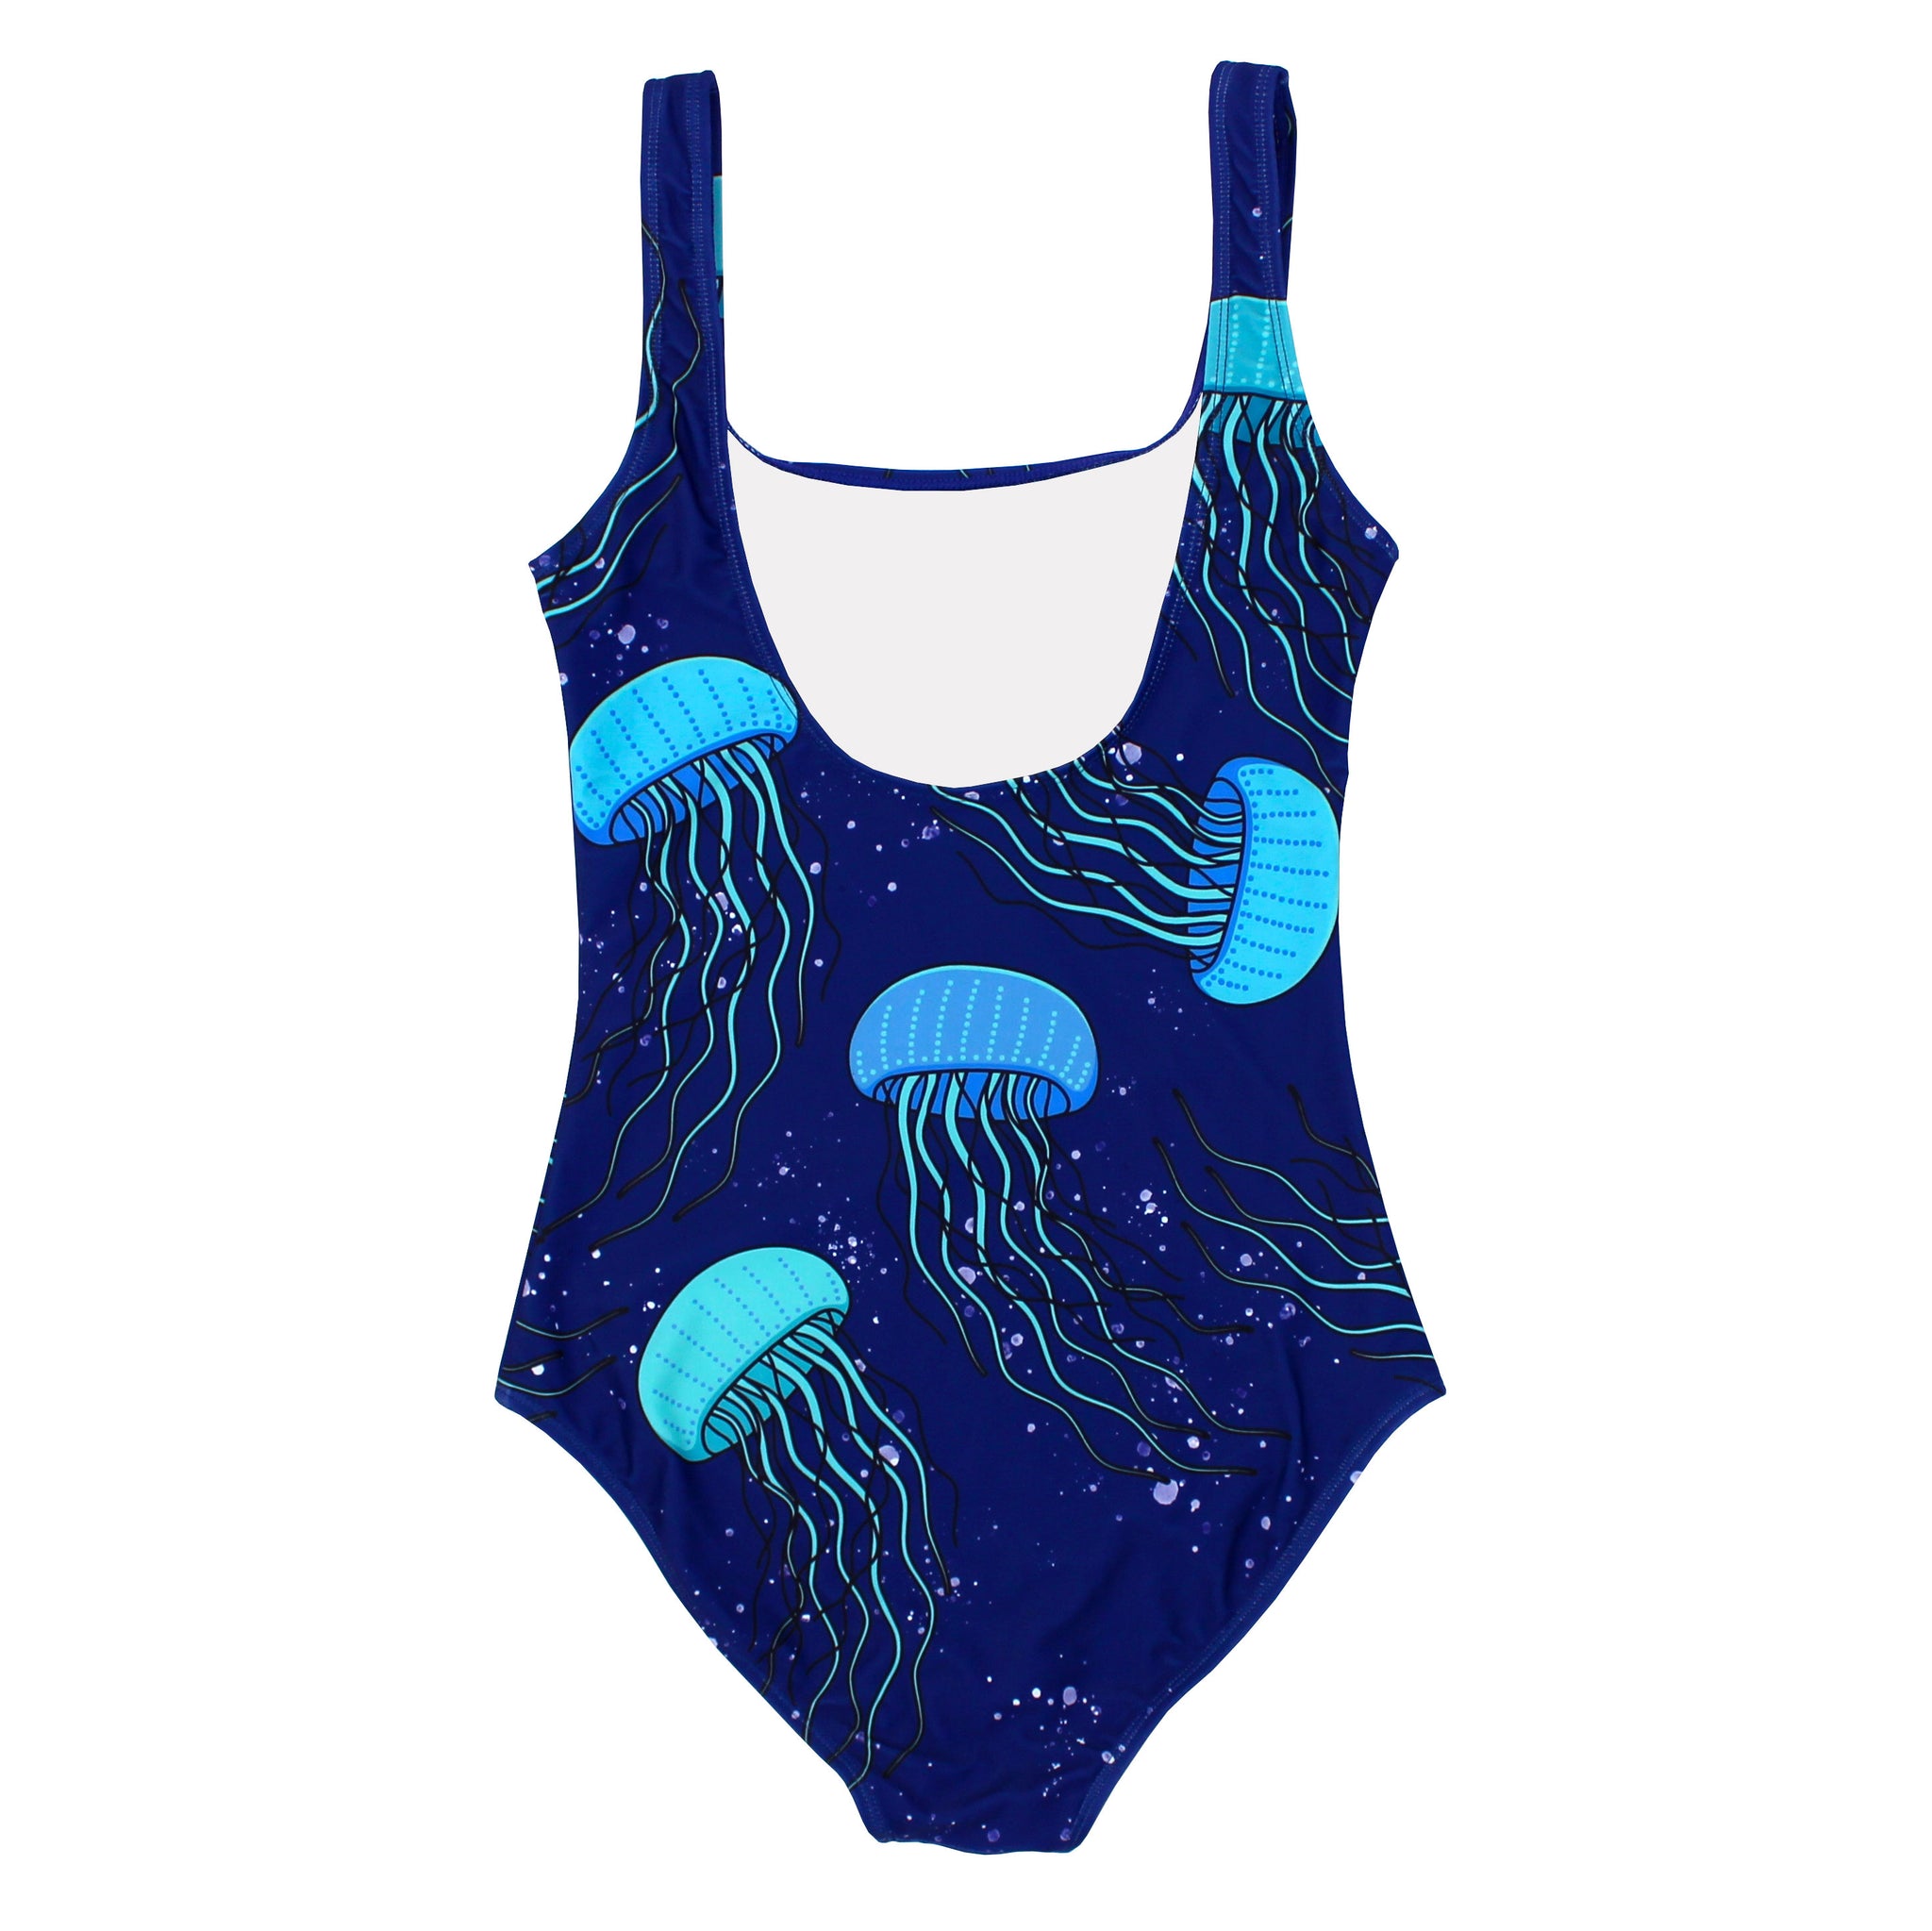 Batoko Jellyfish Swimsuit Made From Recycled Plastic Waste (Back)